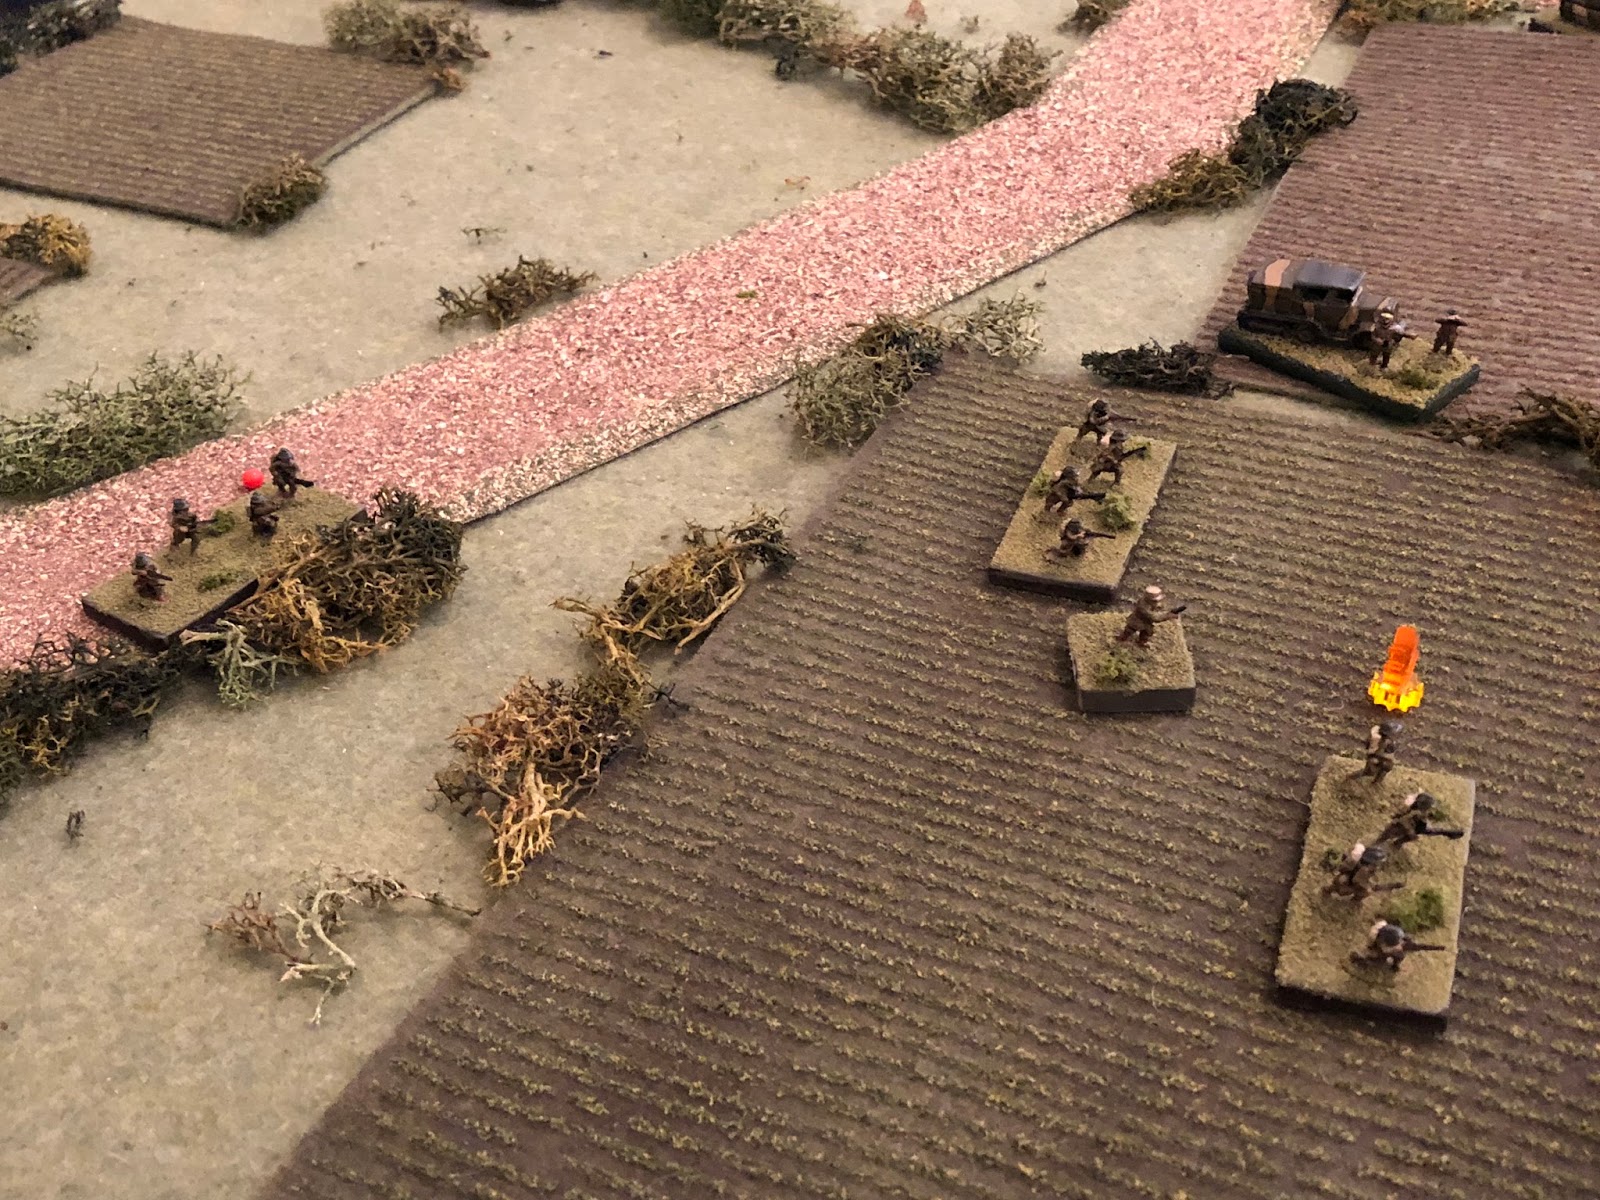  But one of his squads is&nbsp; not feeling so hot and decides to fall back to cover (red bead at far left, from centre bottom). 